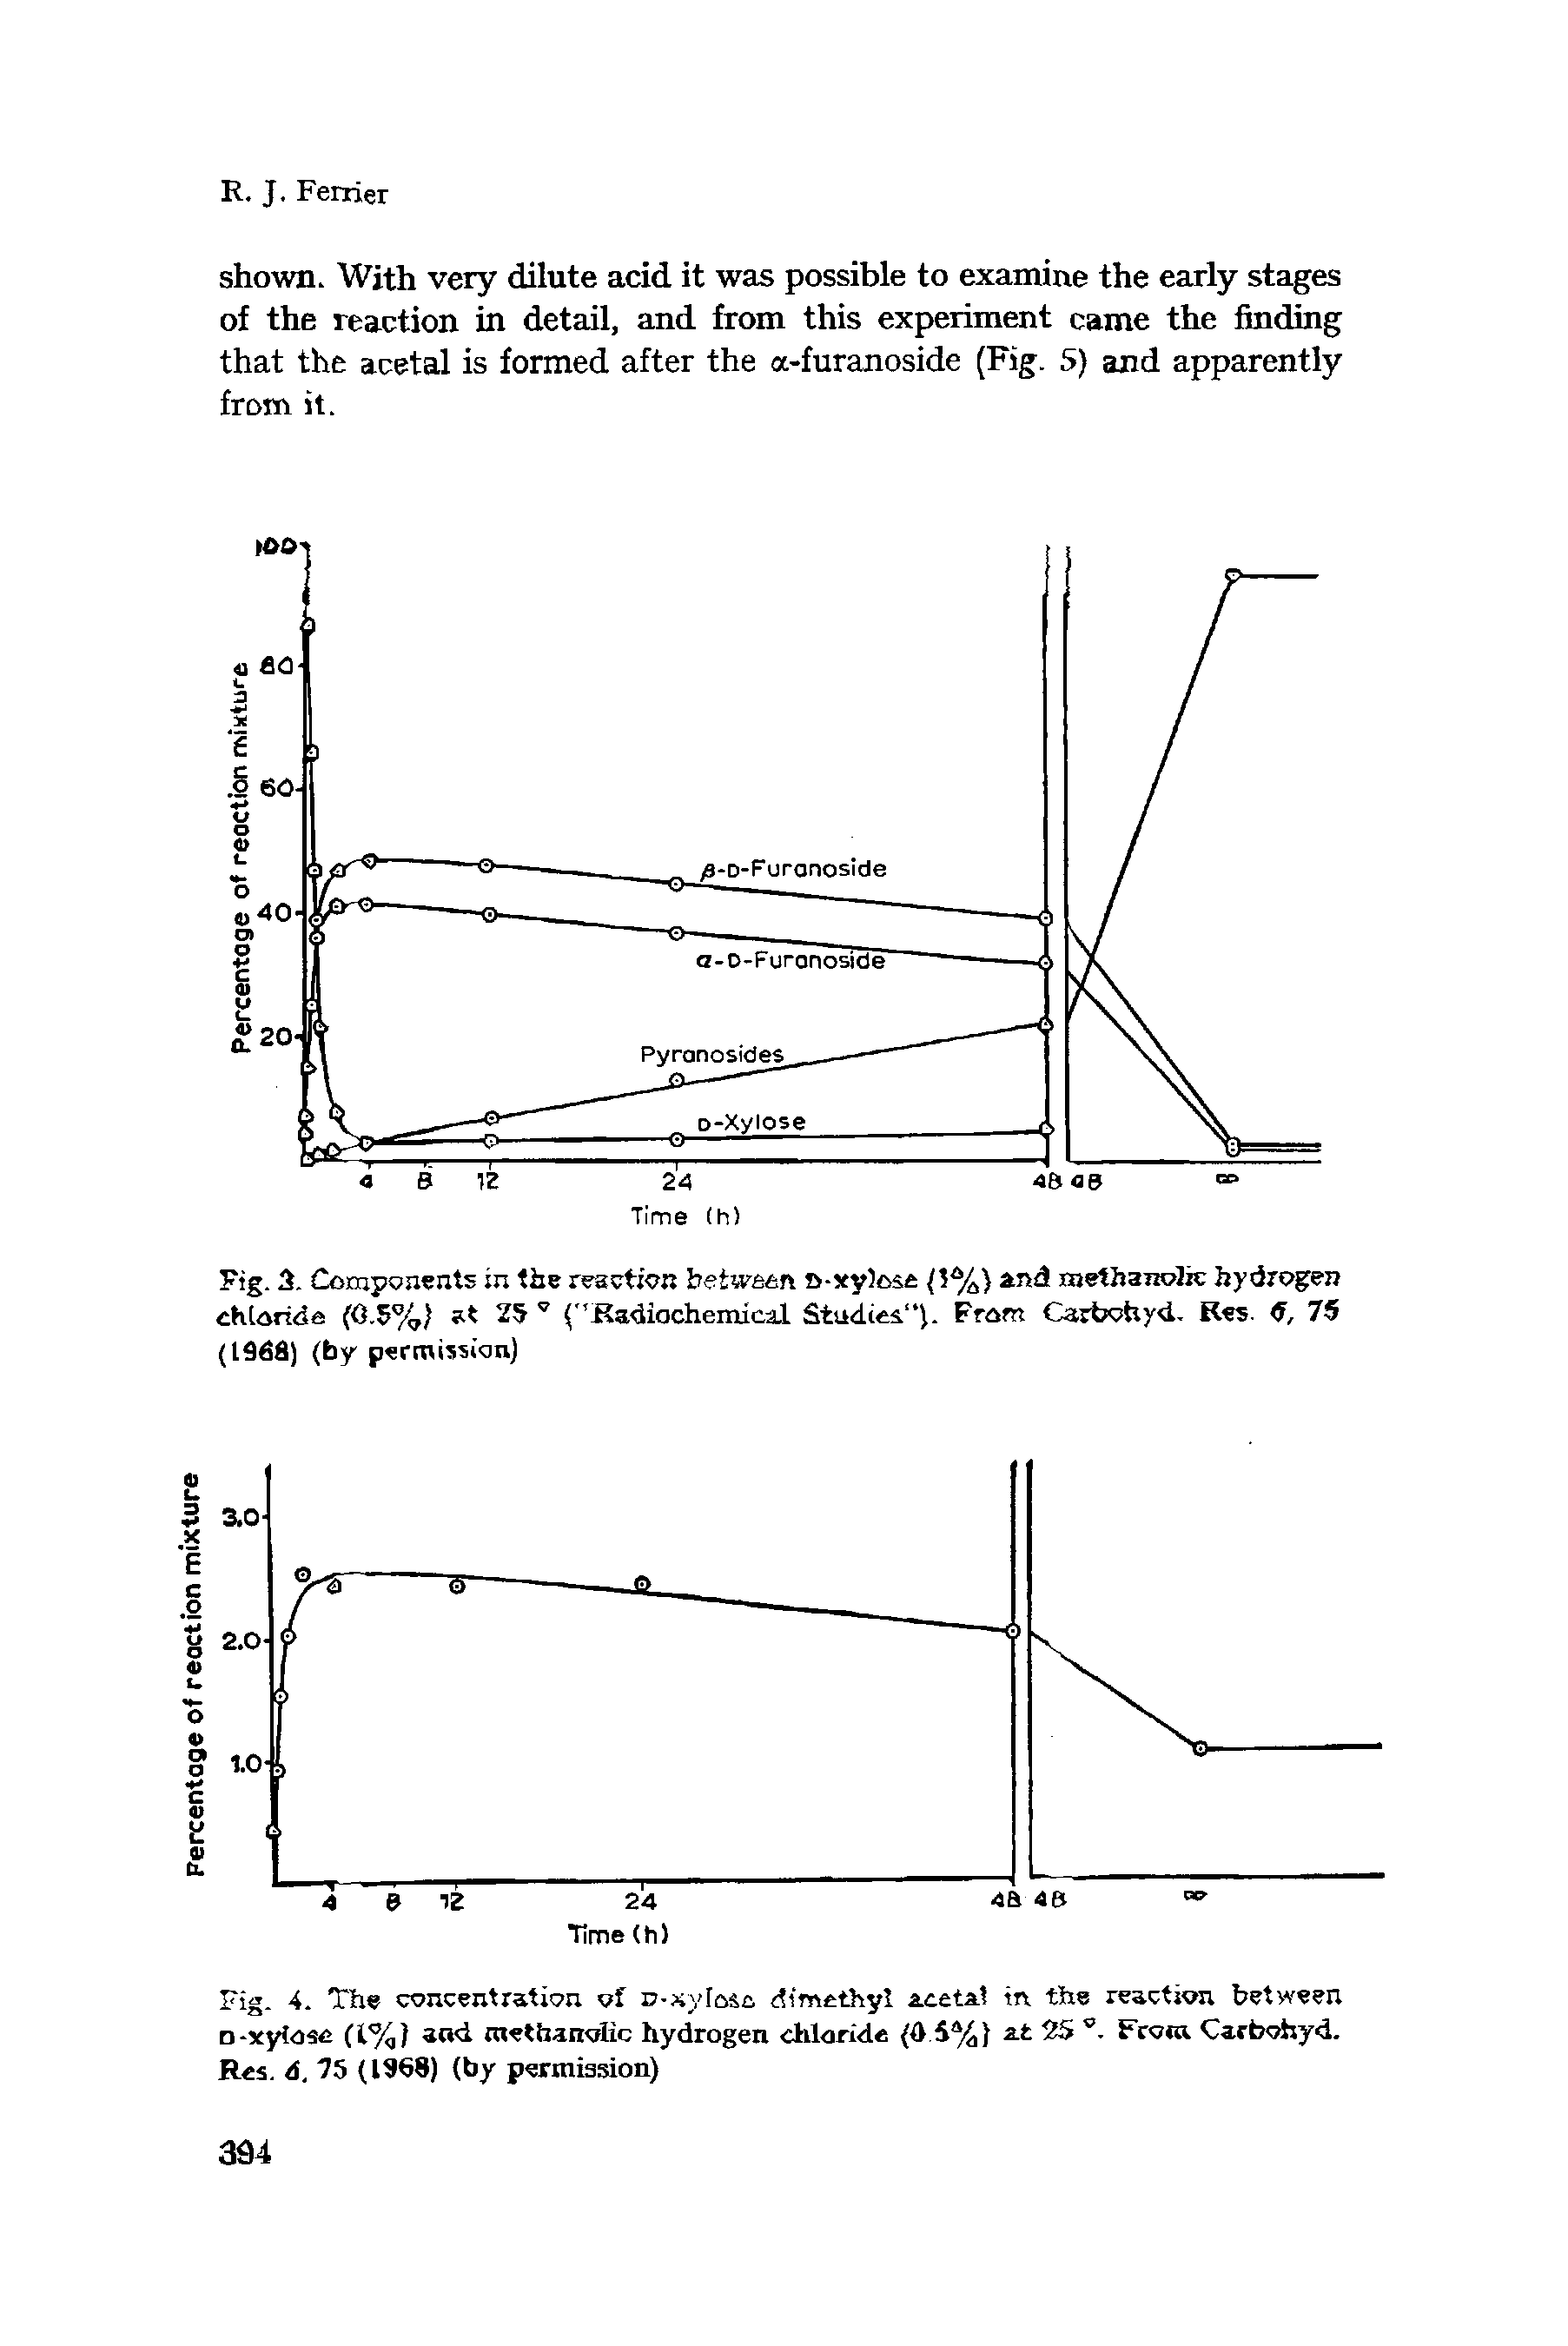 Fig. 4. The concentration of n-syloio dimethyl aceta. in the reaction between D-xyloso (1%) and methanolic hydrogen chloride (0 5%) at 25 . From Carbohyd. Res. d, 75 (1368) (by permission)...